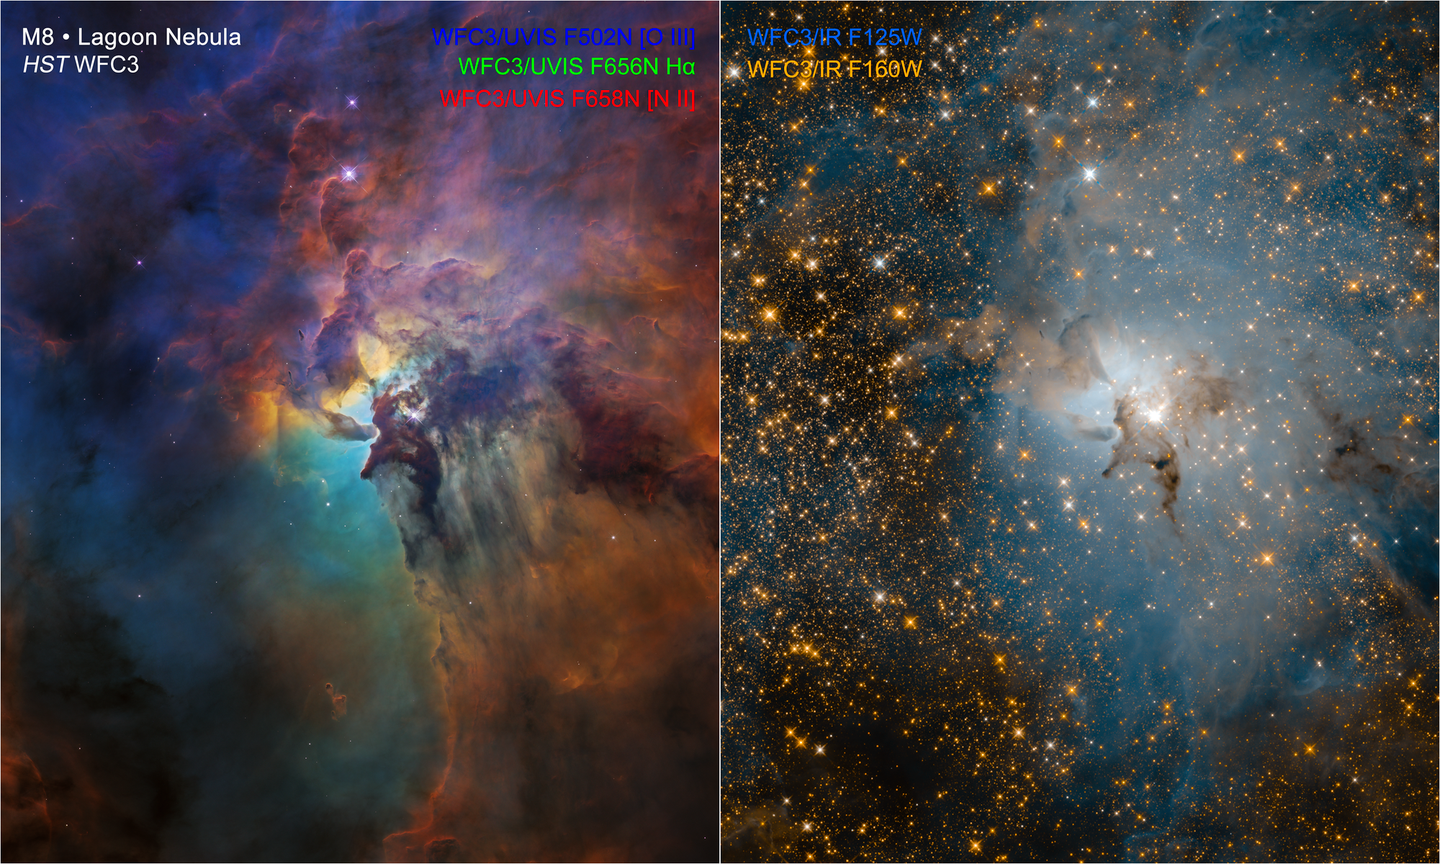 These NASA Hubble Space Telescope images compare two diverse views of the roiling heart of a vast stellar nursery, known as the Lagoon Nebula. The images, one taken in visible and the other in infrared light, celebrate Hubble's 28th anniversary in space.